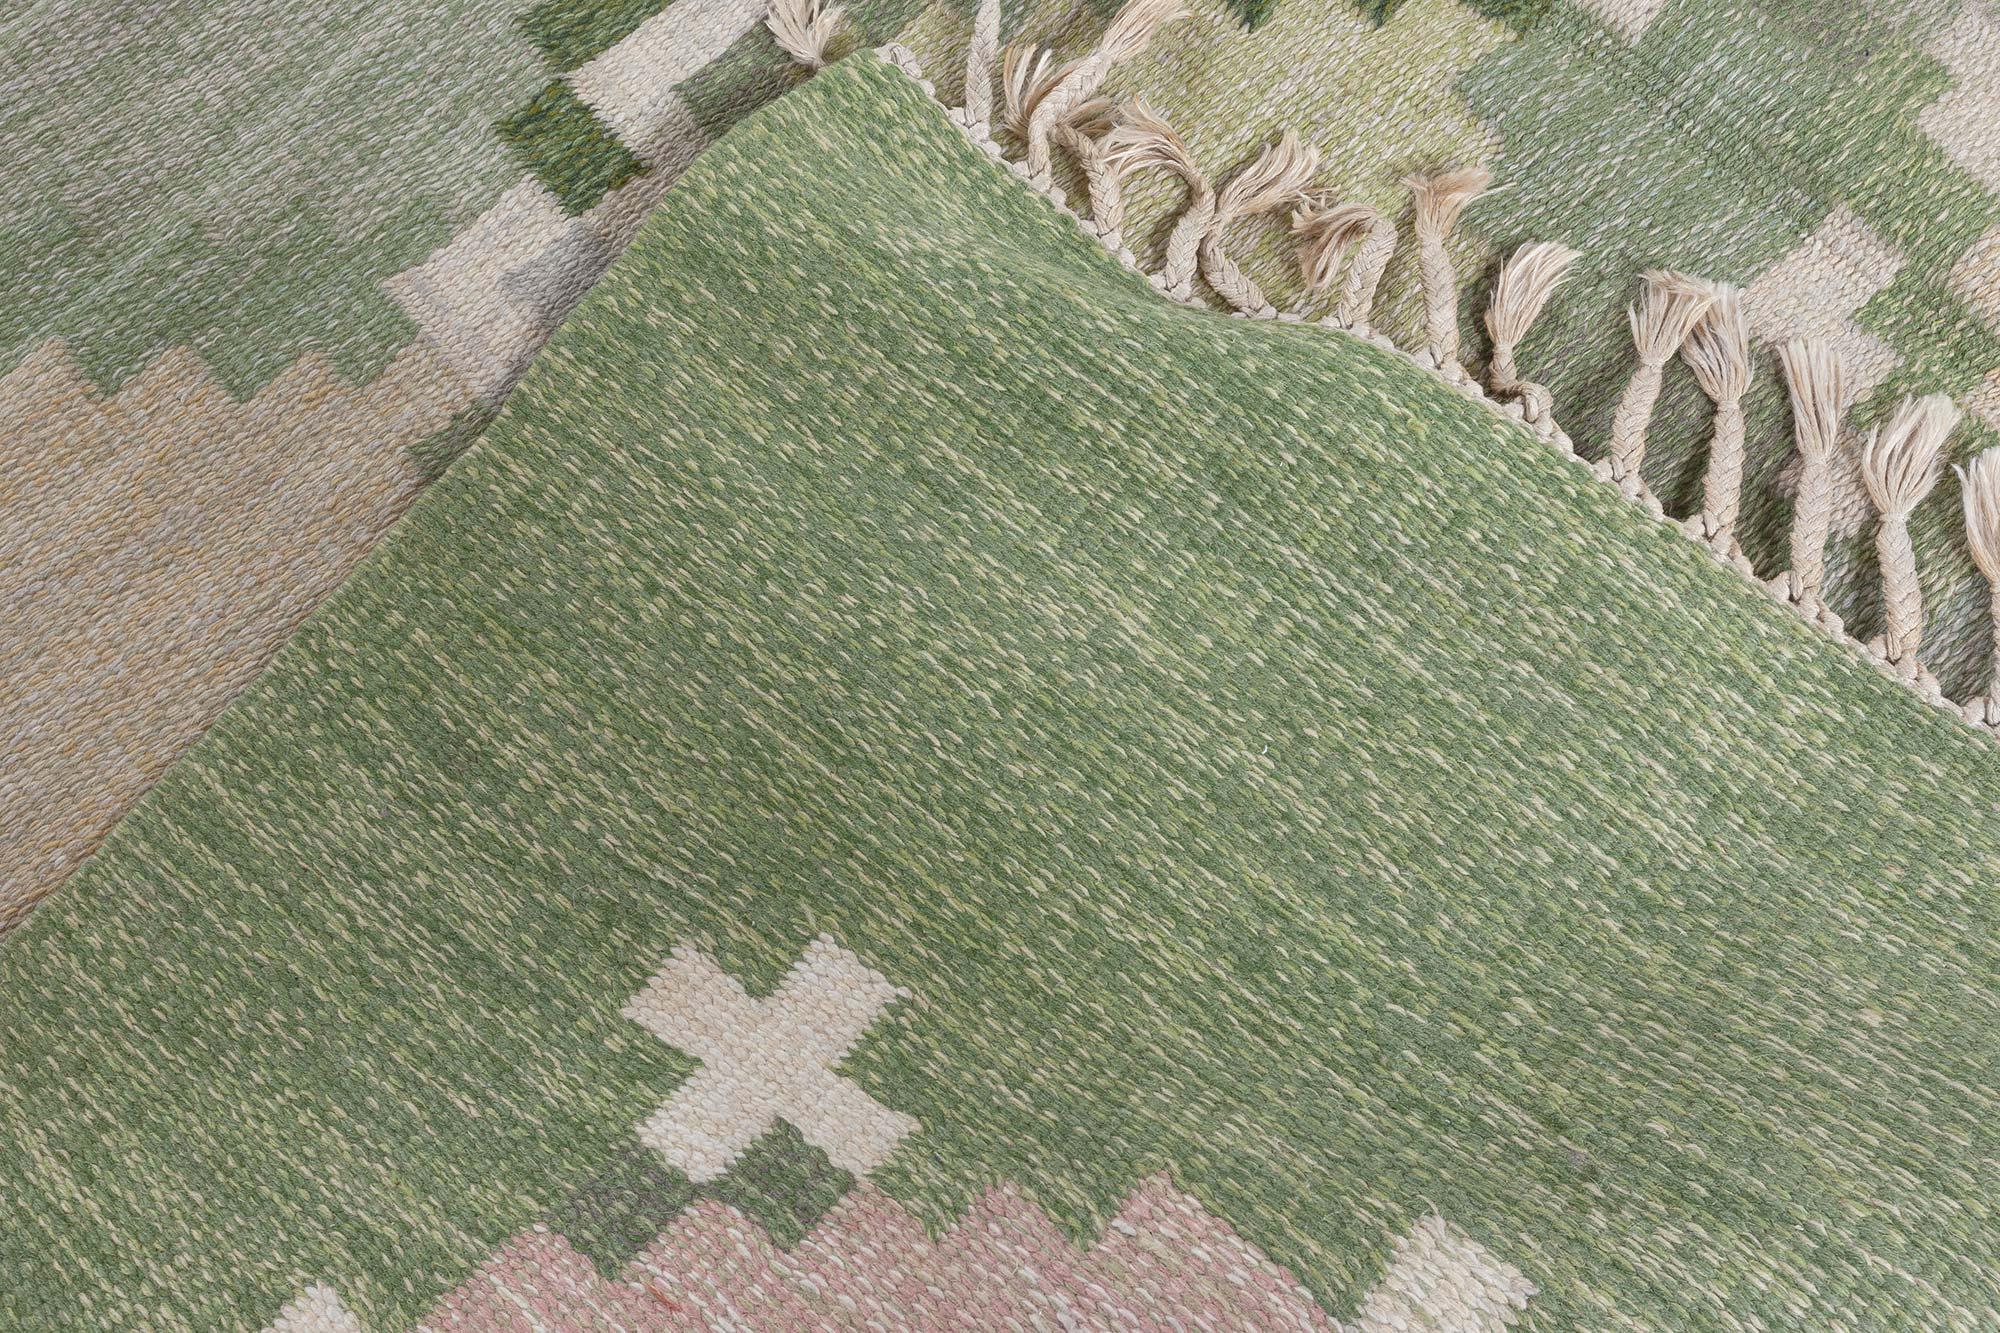 Mid-20th Century Swedish Pea Green Background Flat Weave Rug by Ingegerd Silow For Sale 2